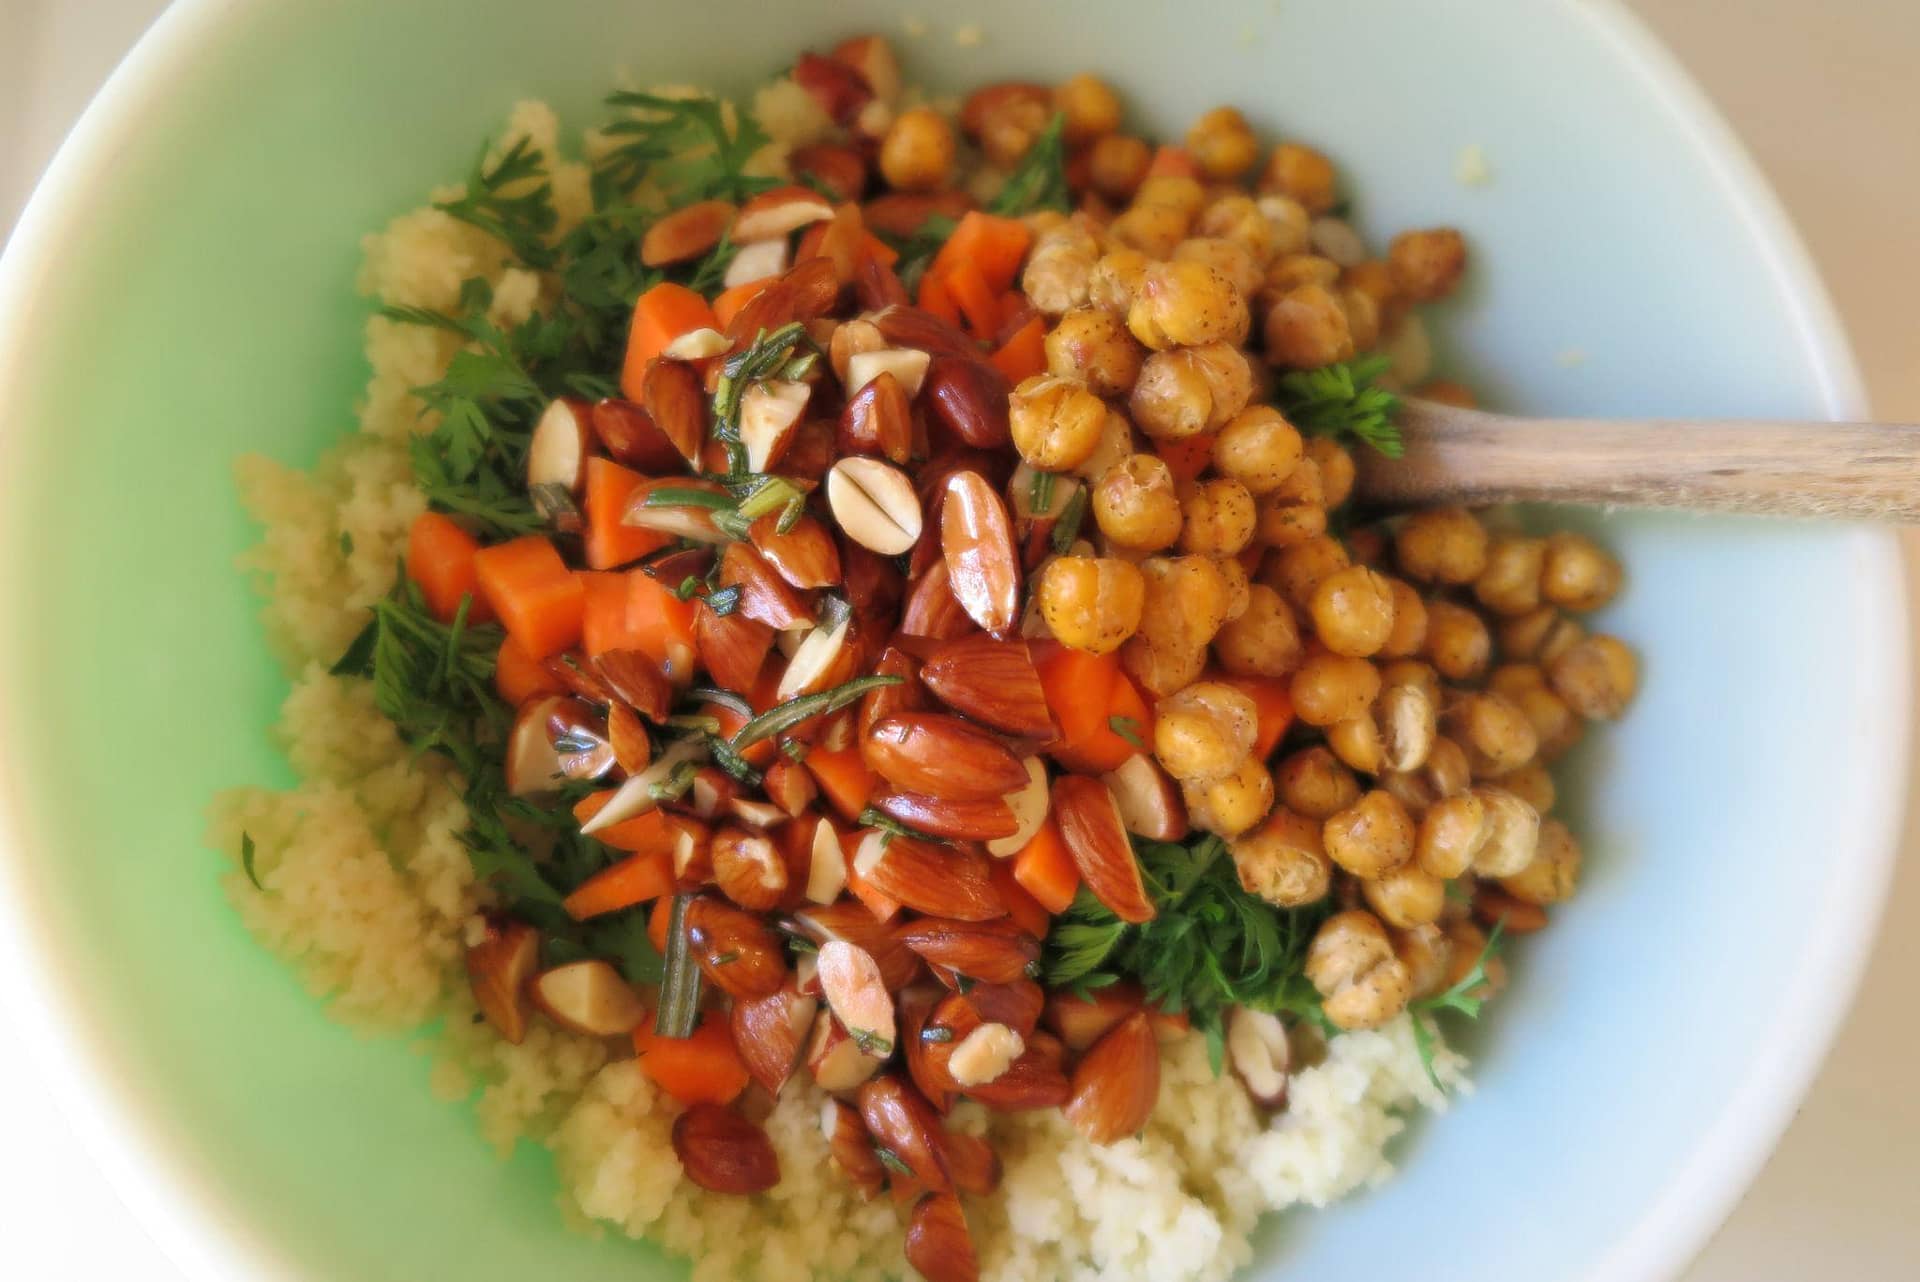 Bowl of salad elements, unmixed. Chickpeas, almonds, and chopped carrots are visible on top